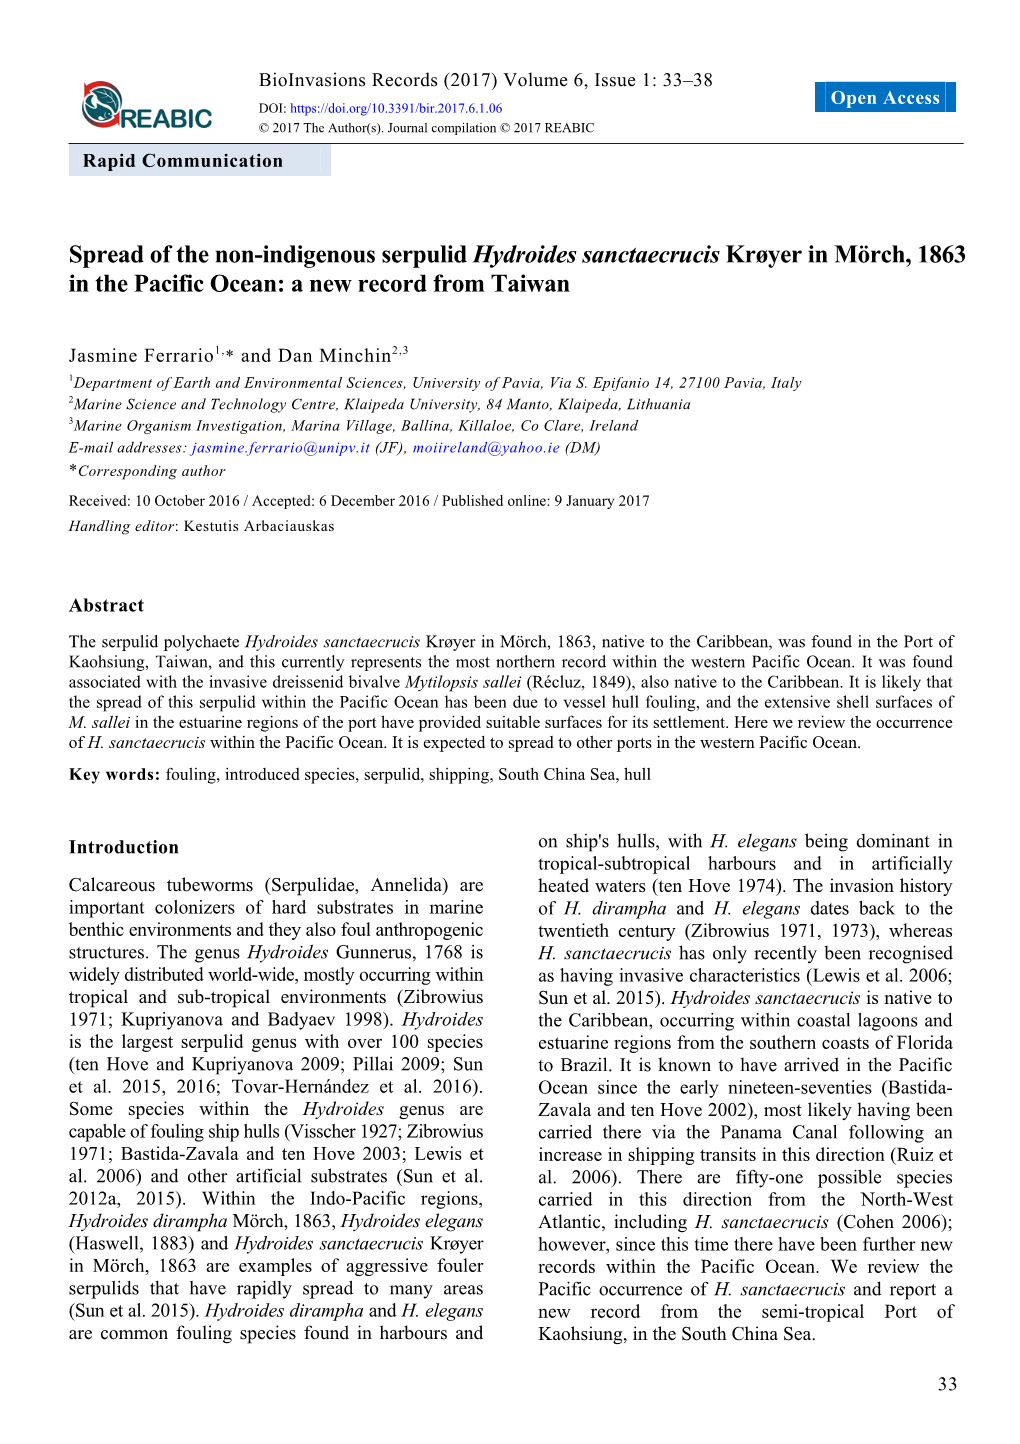 Spread of the Non-Indigenous Serpulid Hydroides Sanctaecrucis Krøyer in Mörch, 1863 in the Pacific Ocean: a New Record from Taiwan